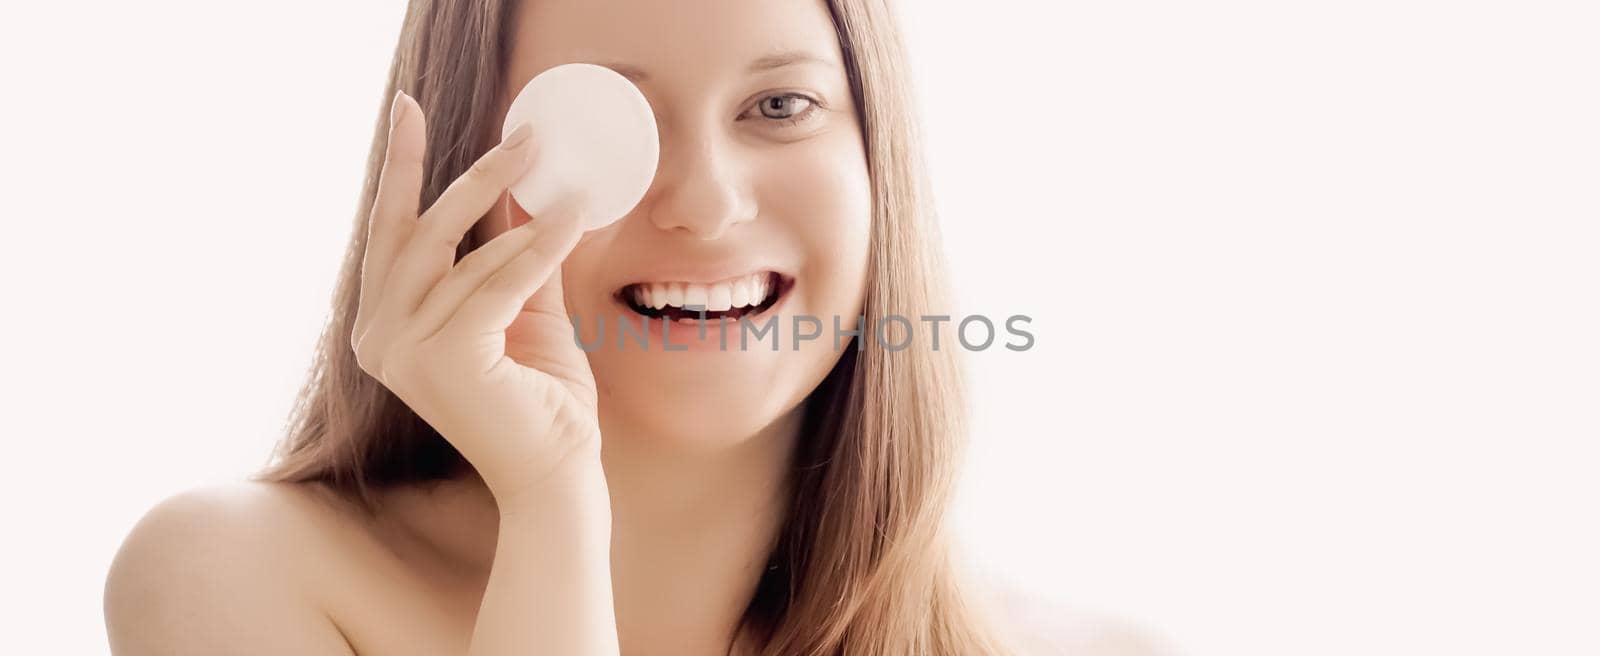 Beautiful woman with cotton pad, perfect skin and shiny hair as make-up, health and wellness concept. Face portrait of young female model for skincare cosmetics and luxury beauty ad design.